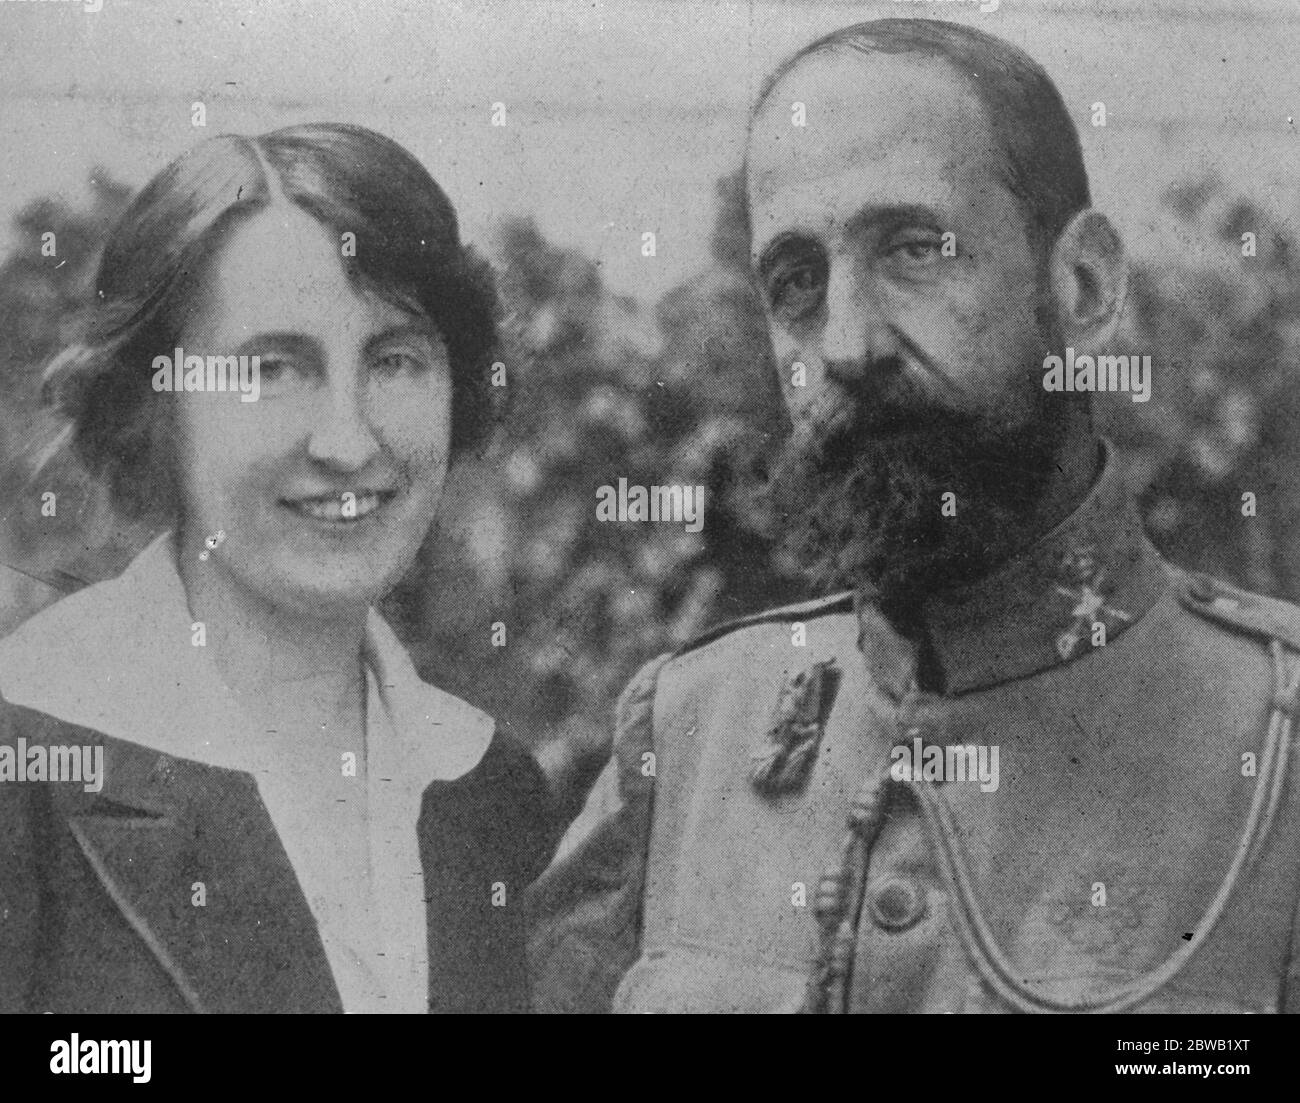 Long Suffering General Home Again and Happy After Captivity In the Hands Of the Moors General Navarro of the Spanish Army photographed recently in Madrid after the great suffering during his lengthy captivity in the hands of the Moors . The picture shows him with his daughter 22 February 1923 after the Battle of Annual in Spanish Morroco , Rif War Stock Photo